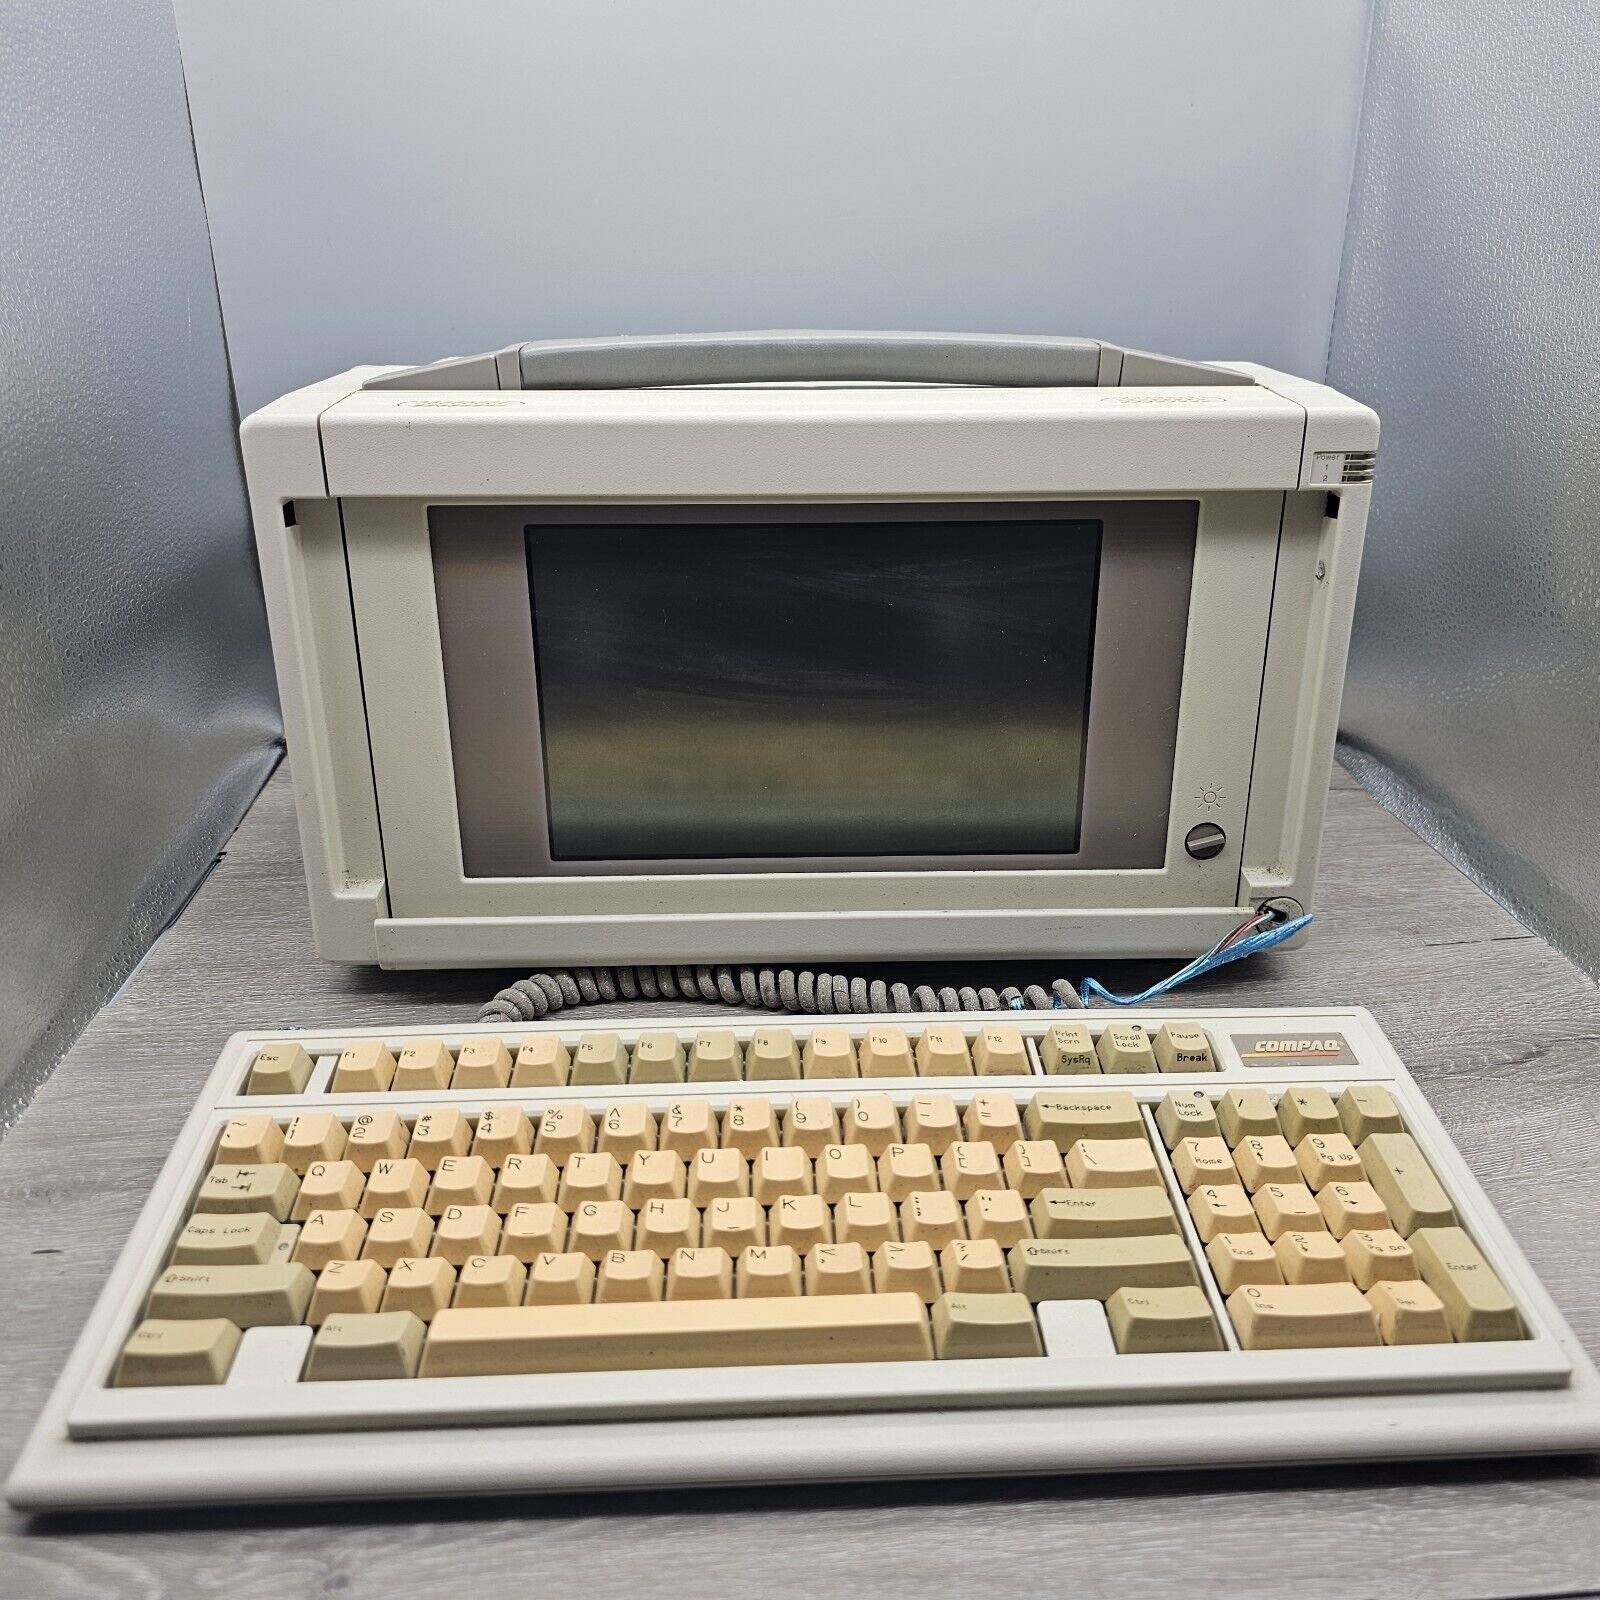 Compaq 386 Portable Computer. Model: 2670 with Detachable Keyboard Parts Only